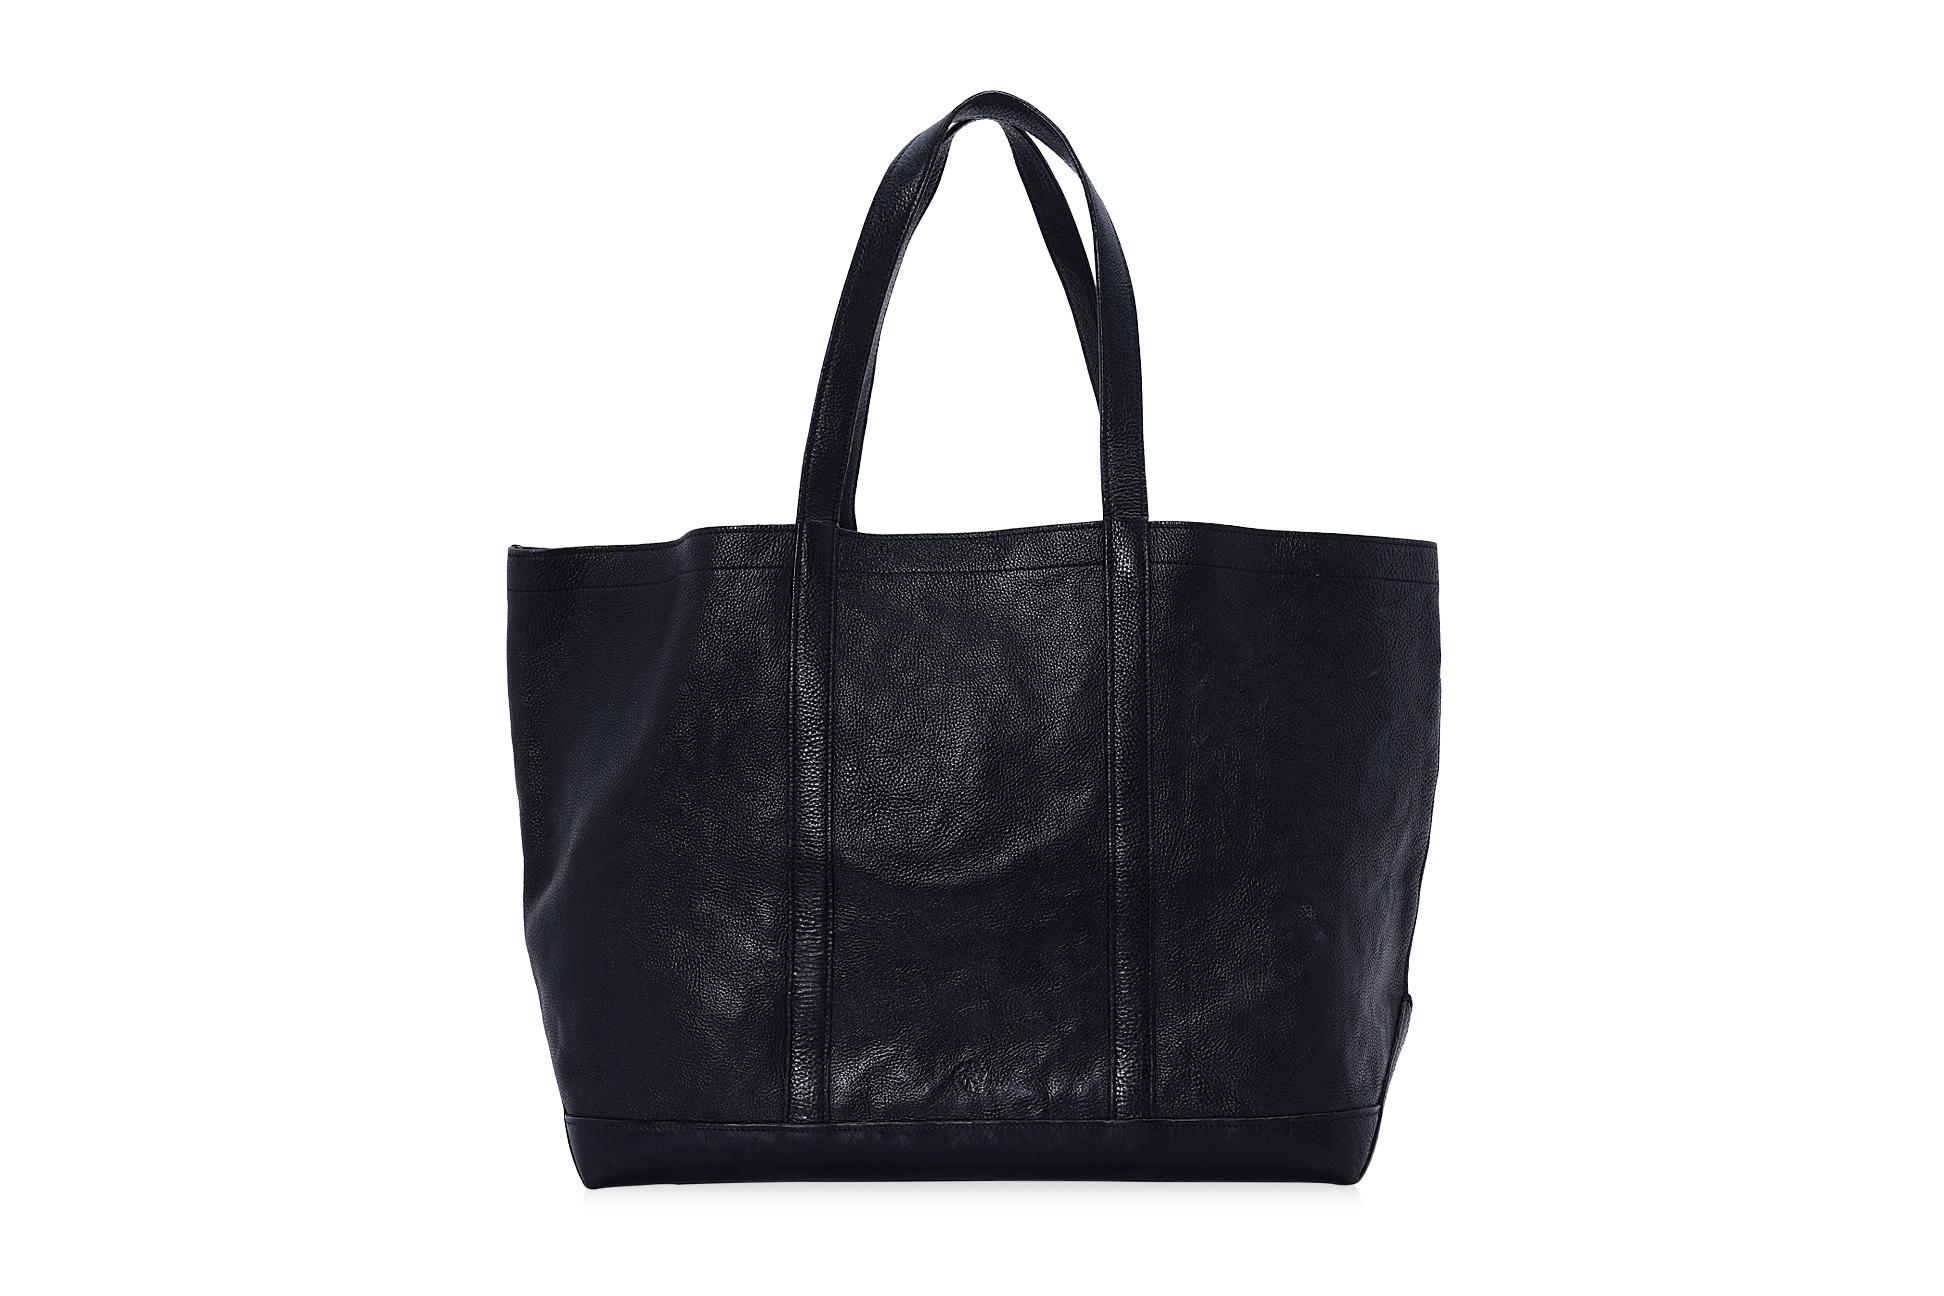 A MULBERRY BLACK LEATHER TOTE BAG